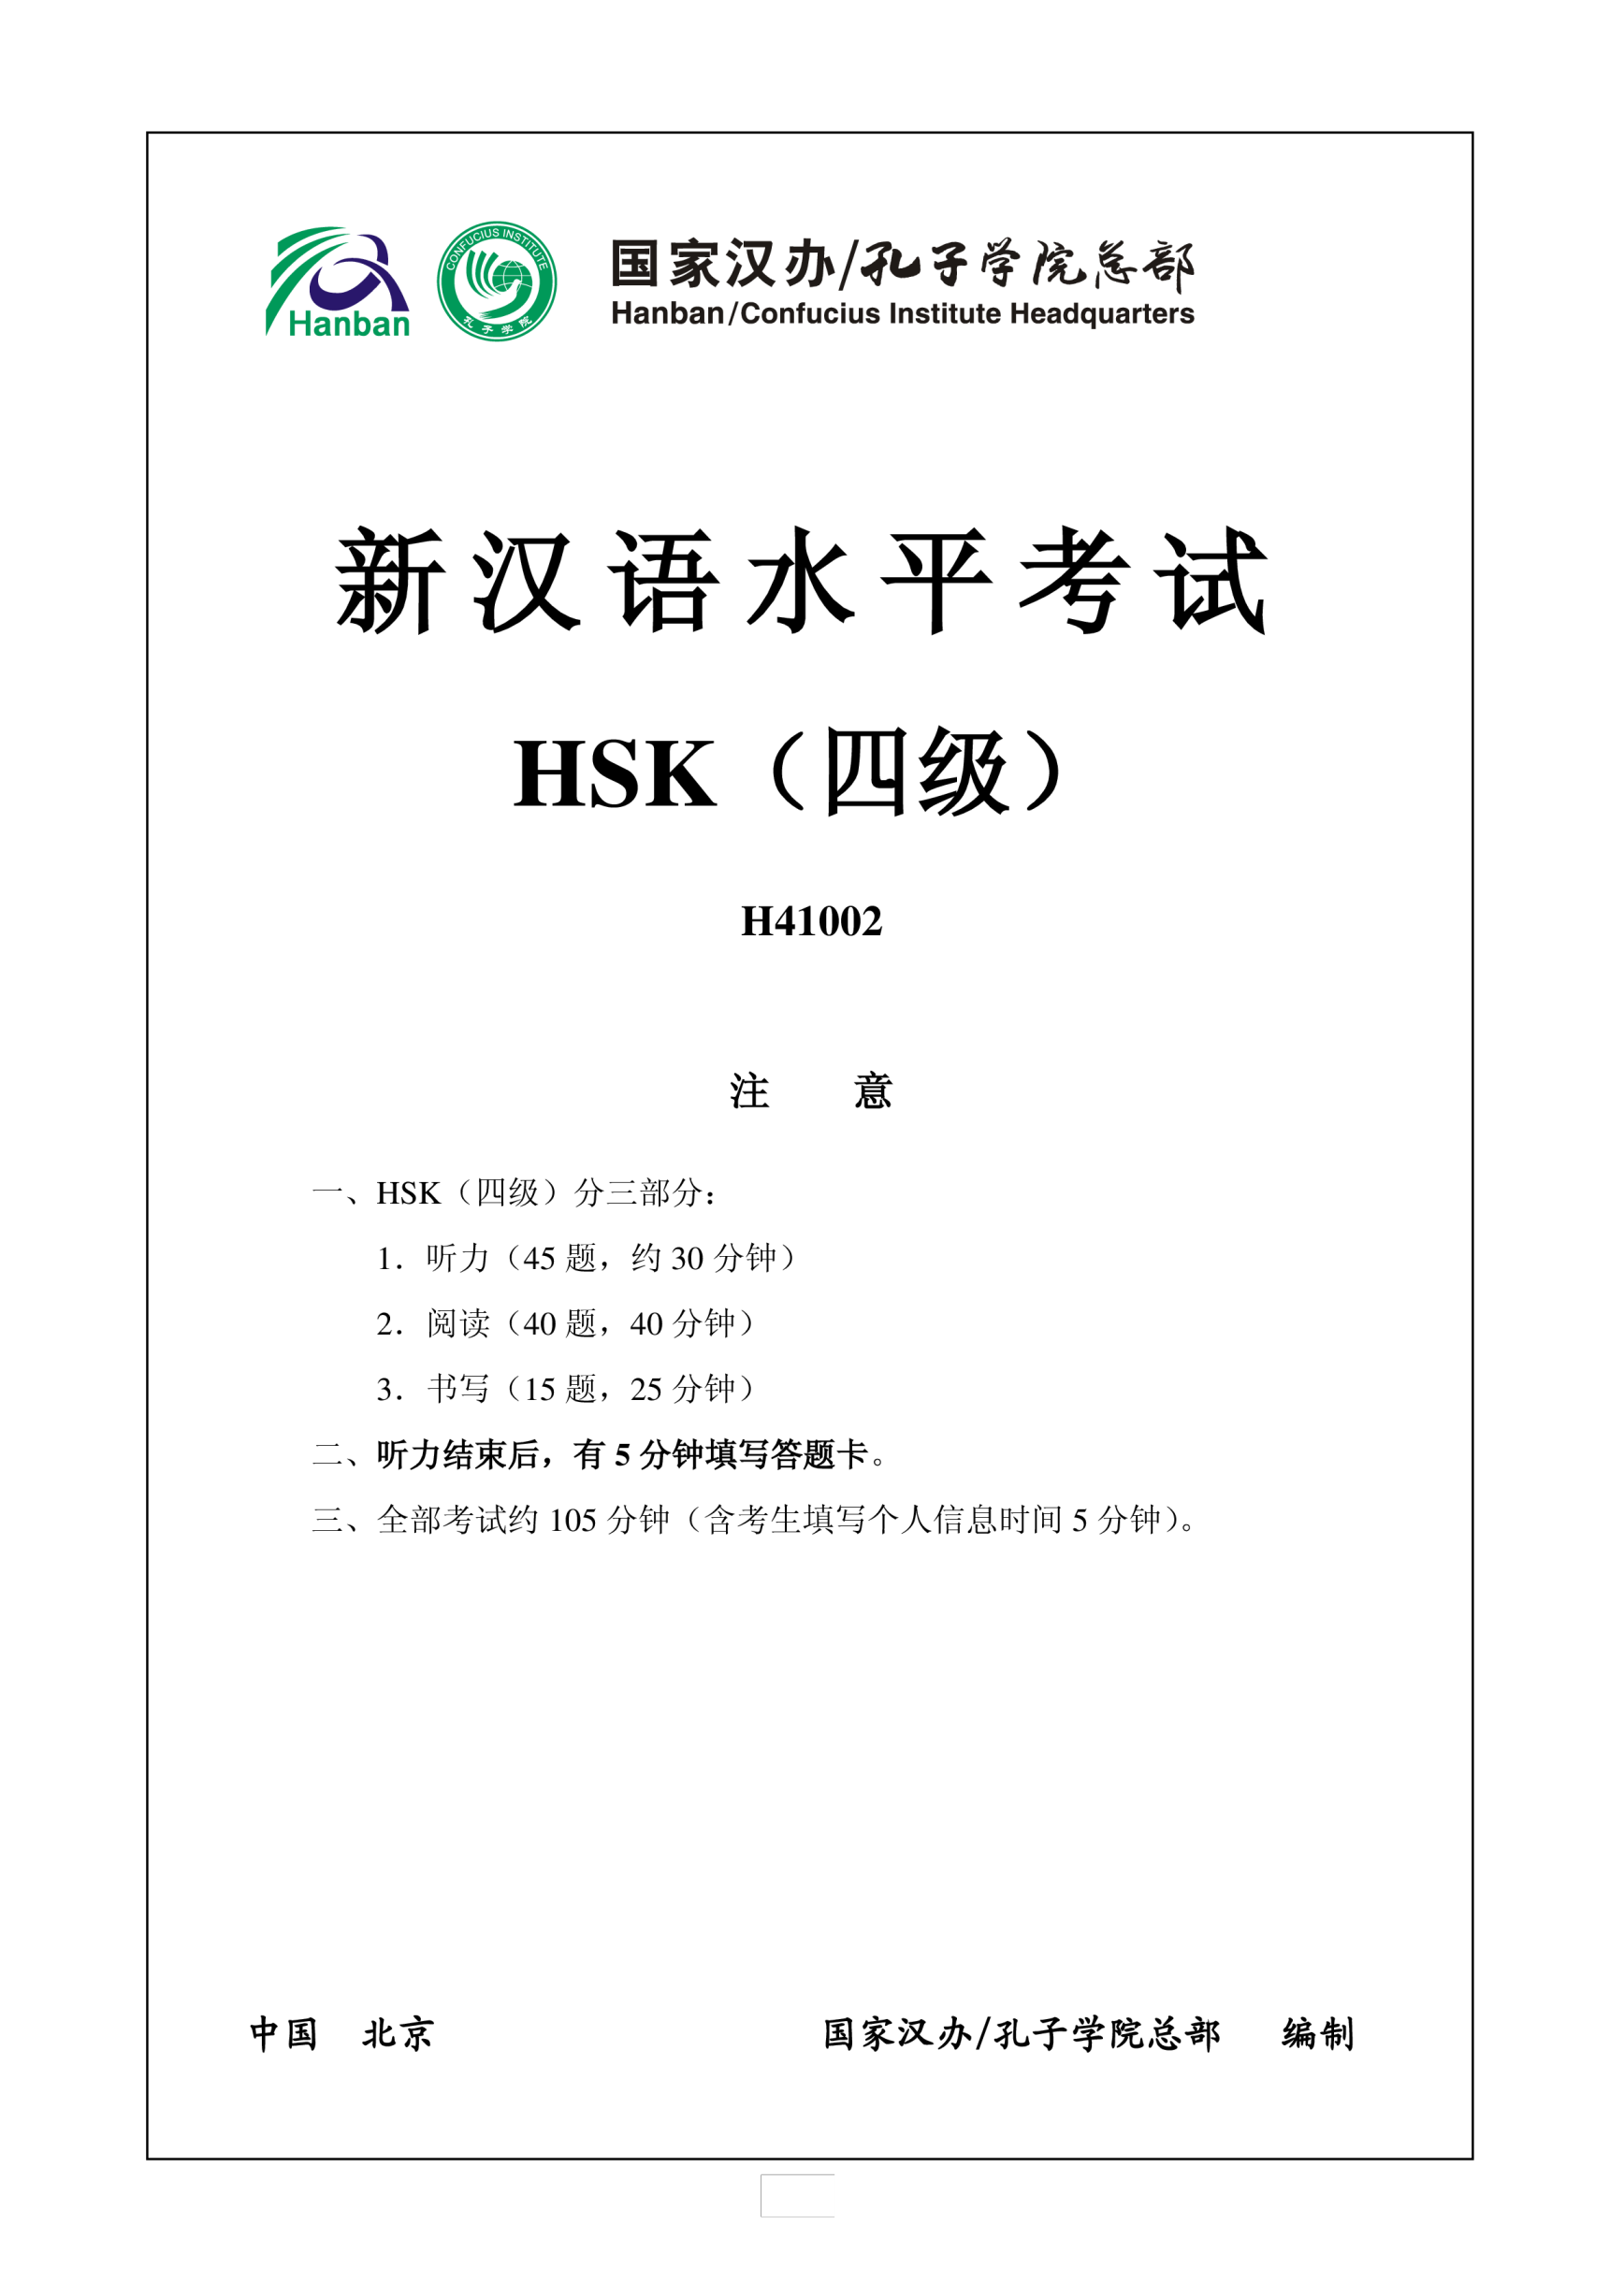 template preview imageHSK4 Chinese Exam including Answers # HSK H41002